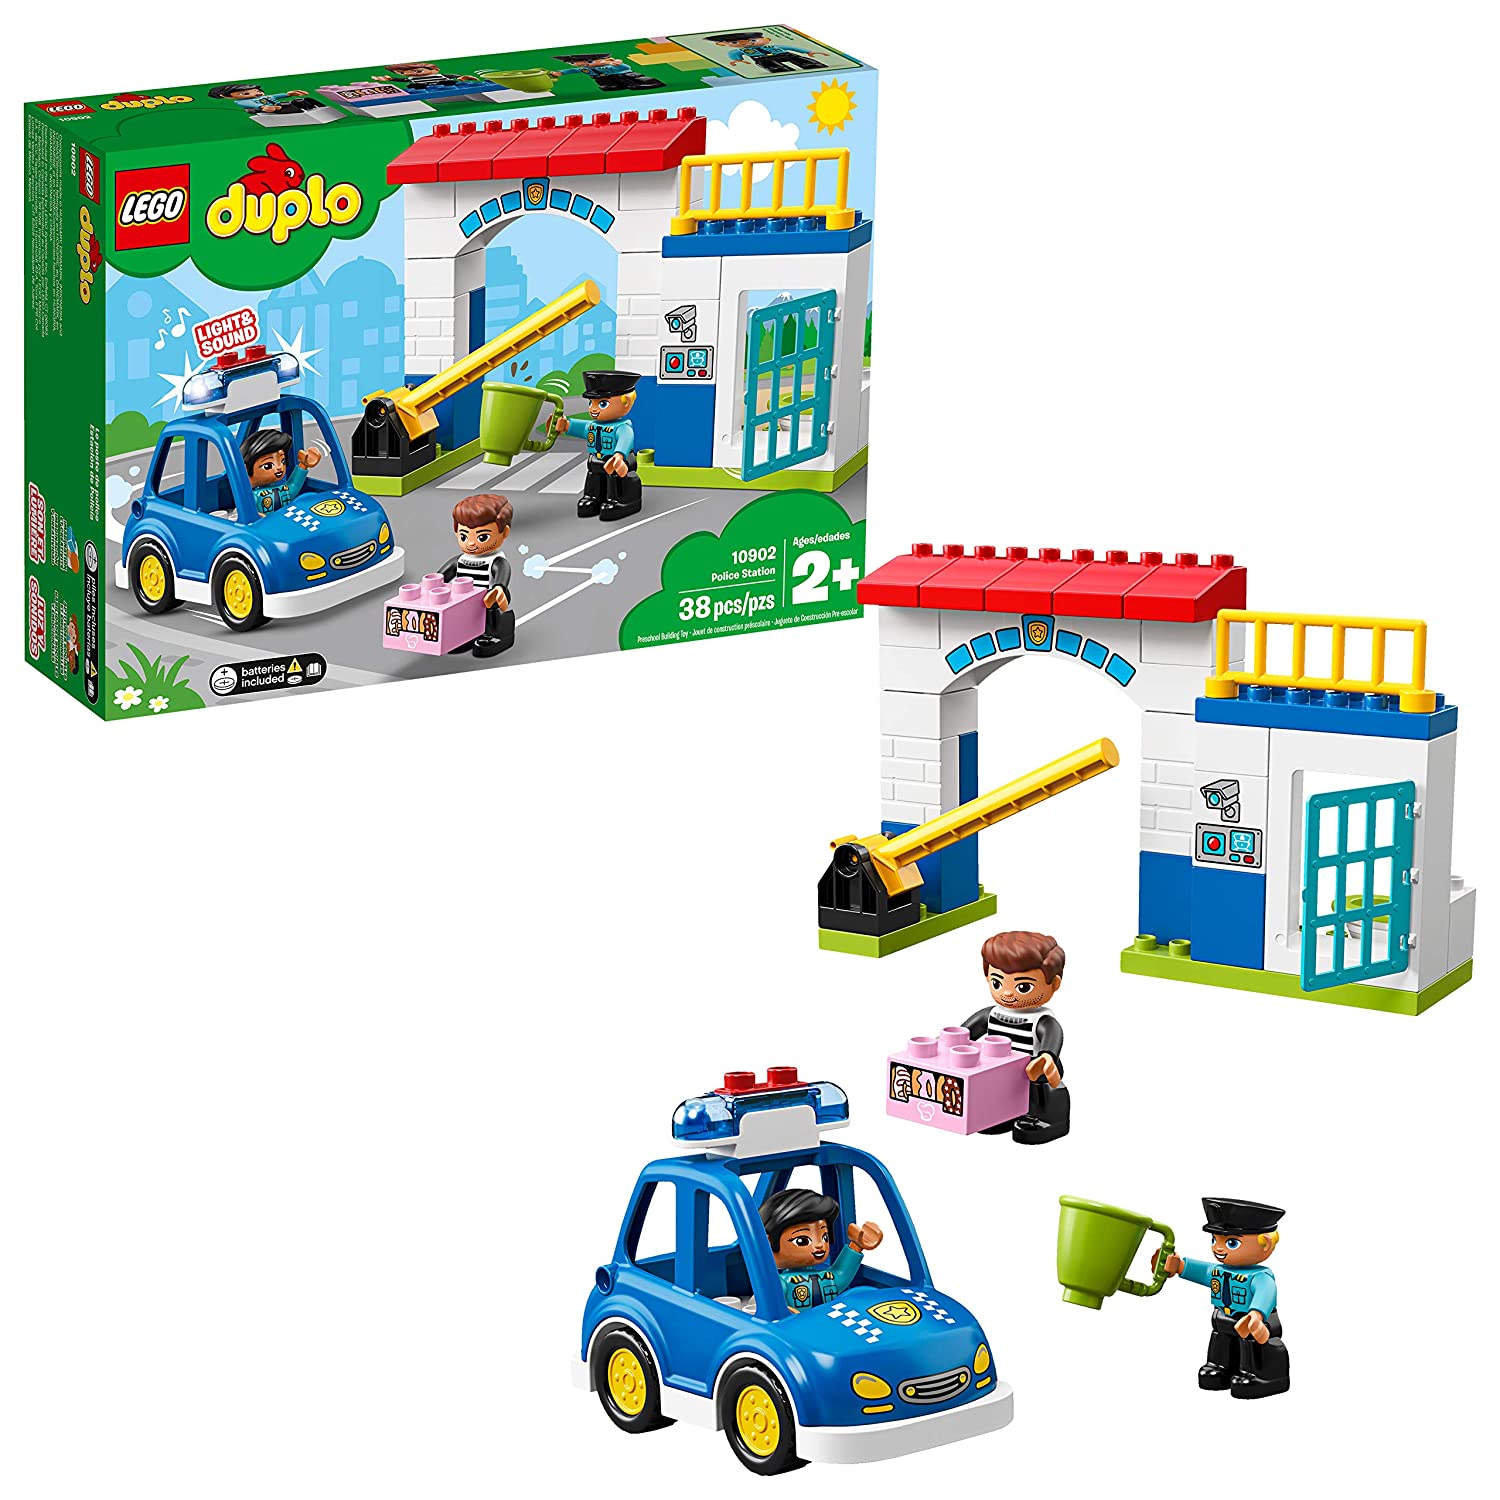 9 Best LEGO Police Station Set 2023 - Buying Guide & Reviews 6